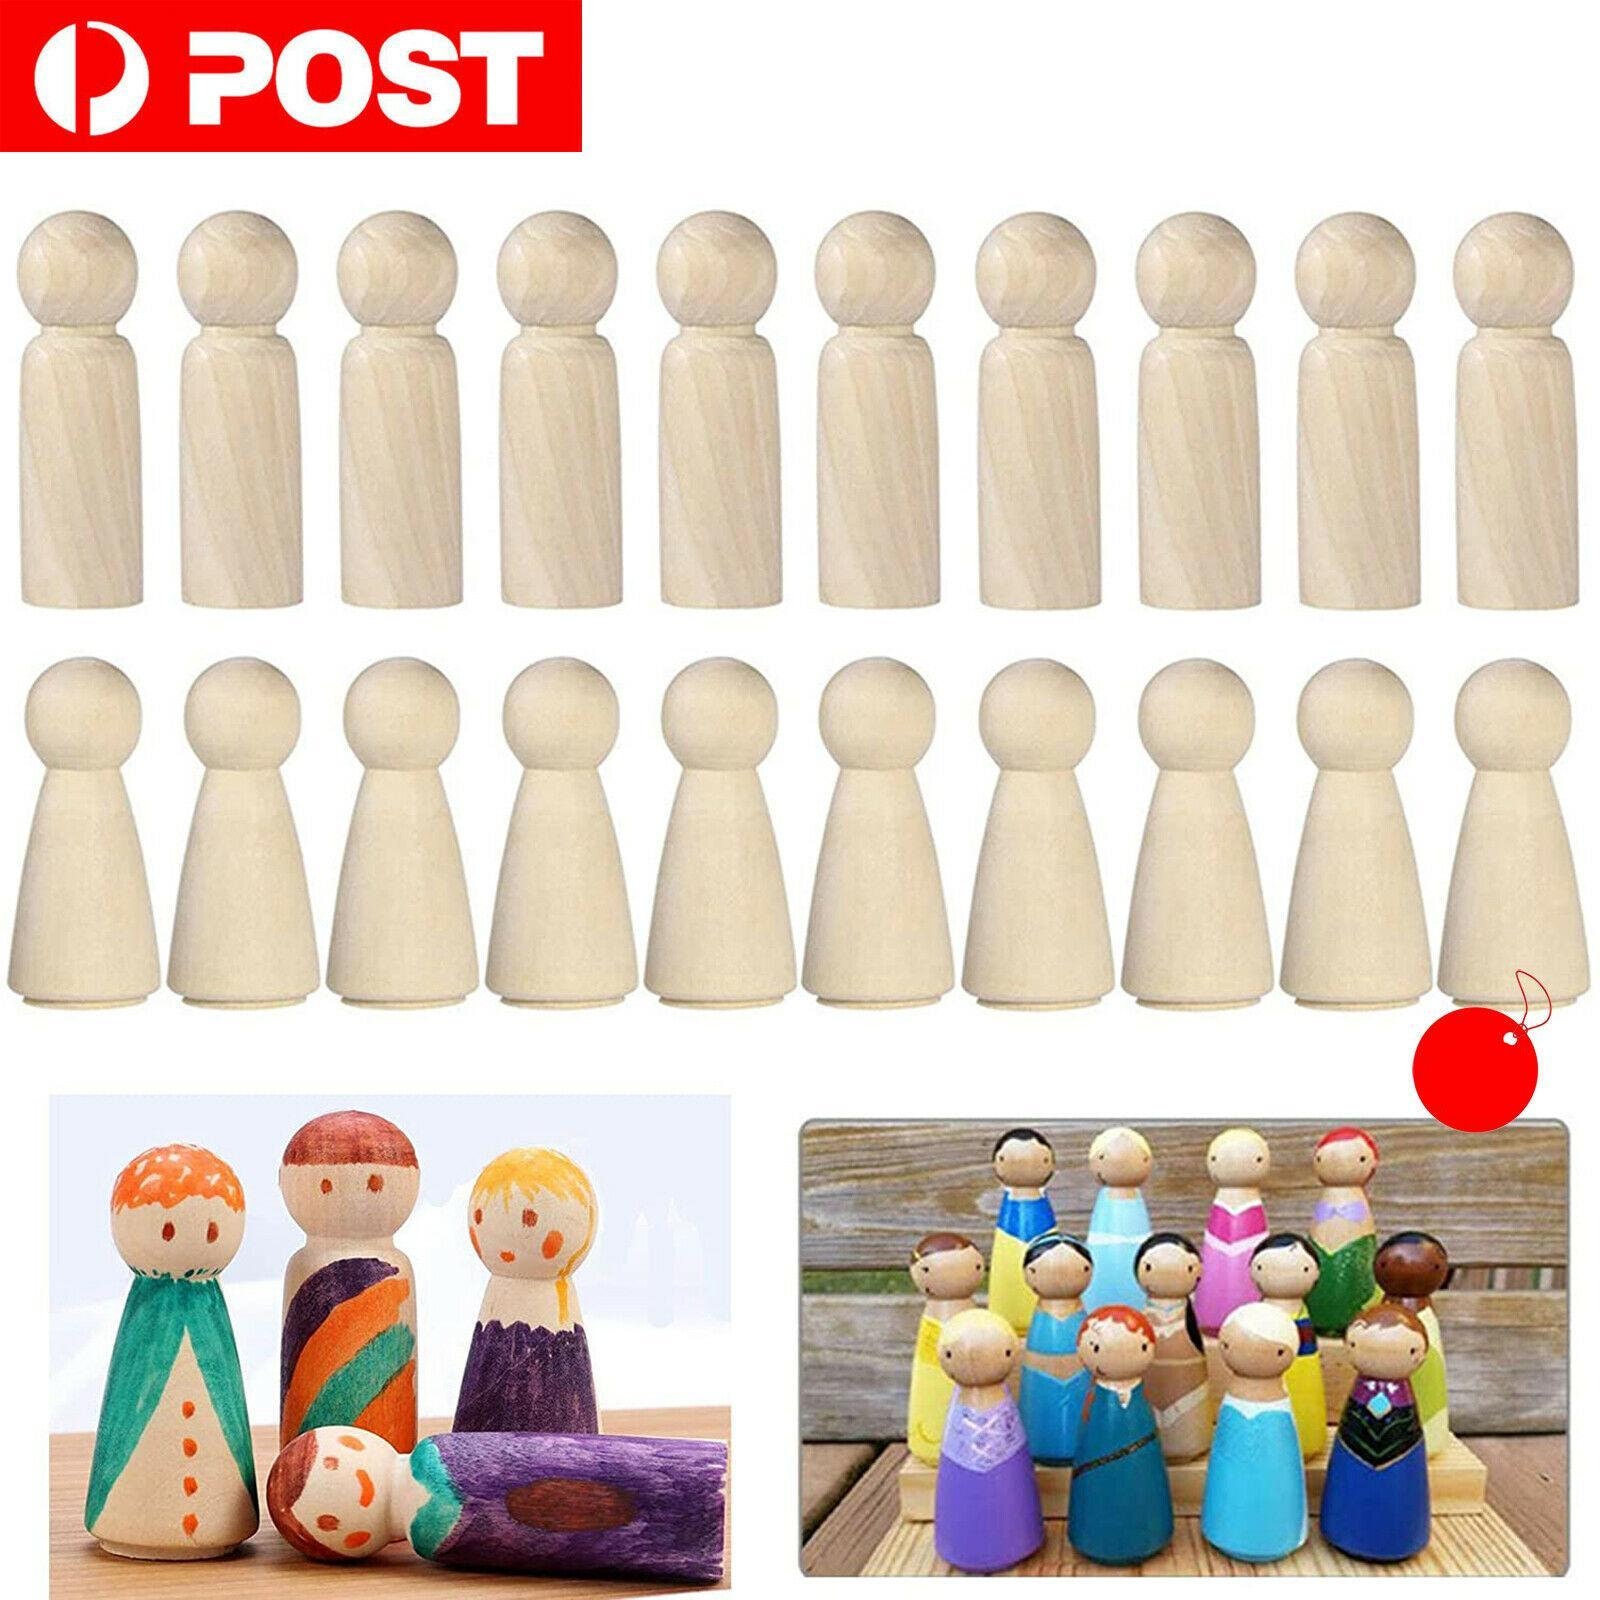 Camelize Wooden Peg Dolls,50 Pcs Unfinished Wooden Family Figures,Nature Wooden Decorative DIY Doll People for Kids Painting Decoration Toy,Storage Case in Assorted Sizes Craft Art Projects 